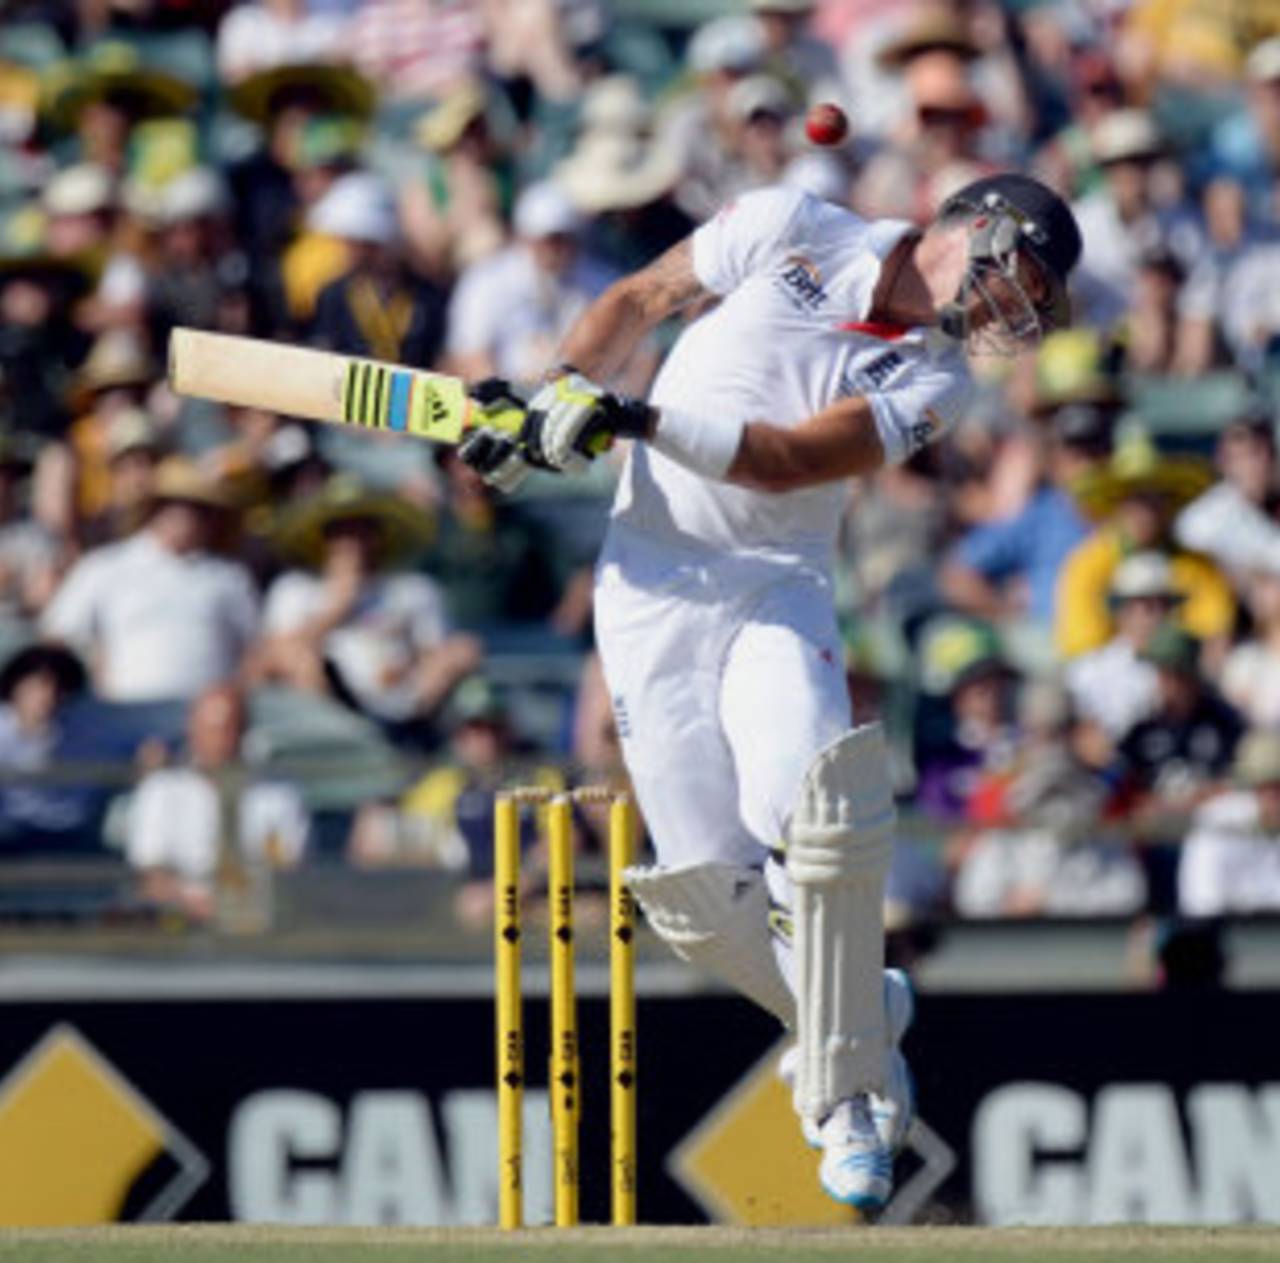 Kevin Pietersen was made to hop about, Australia v England, 3rd Test, Perth, 2nd day, December 14, 2013